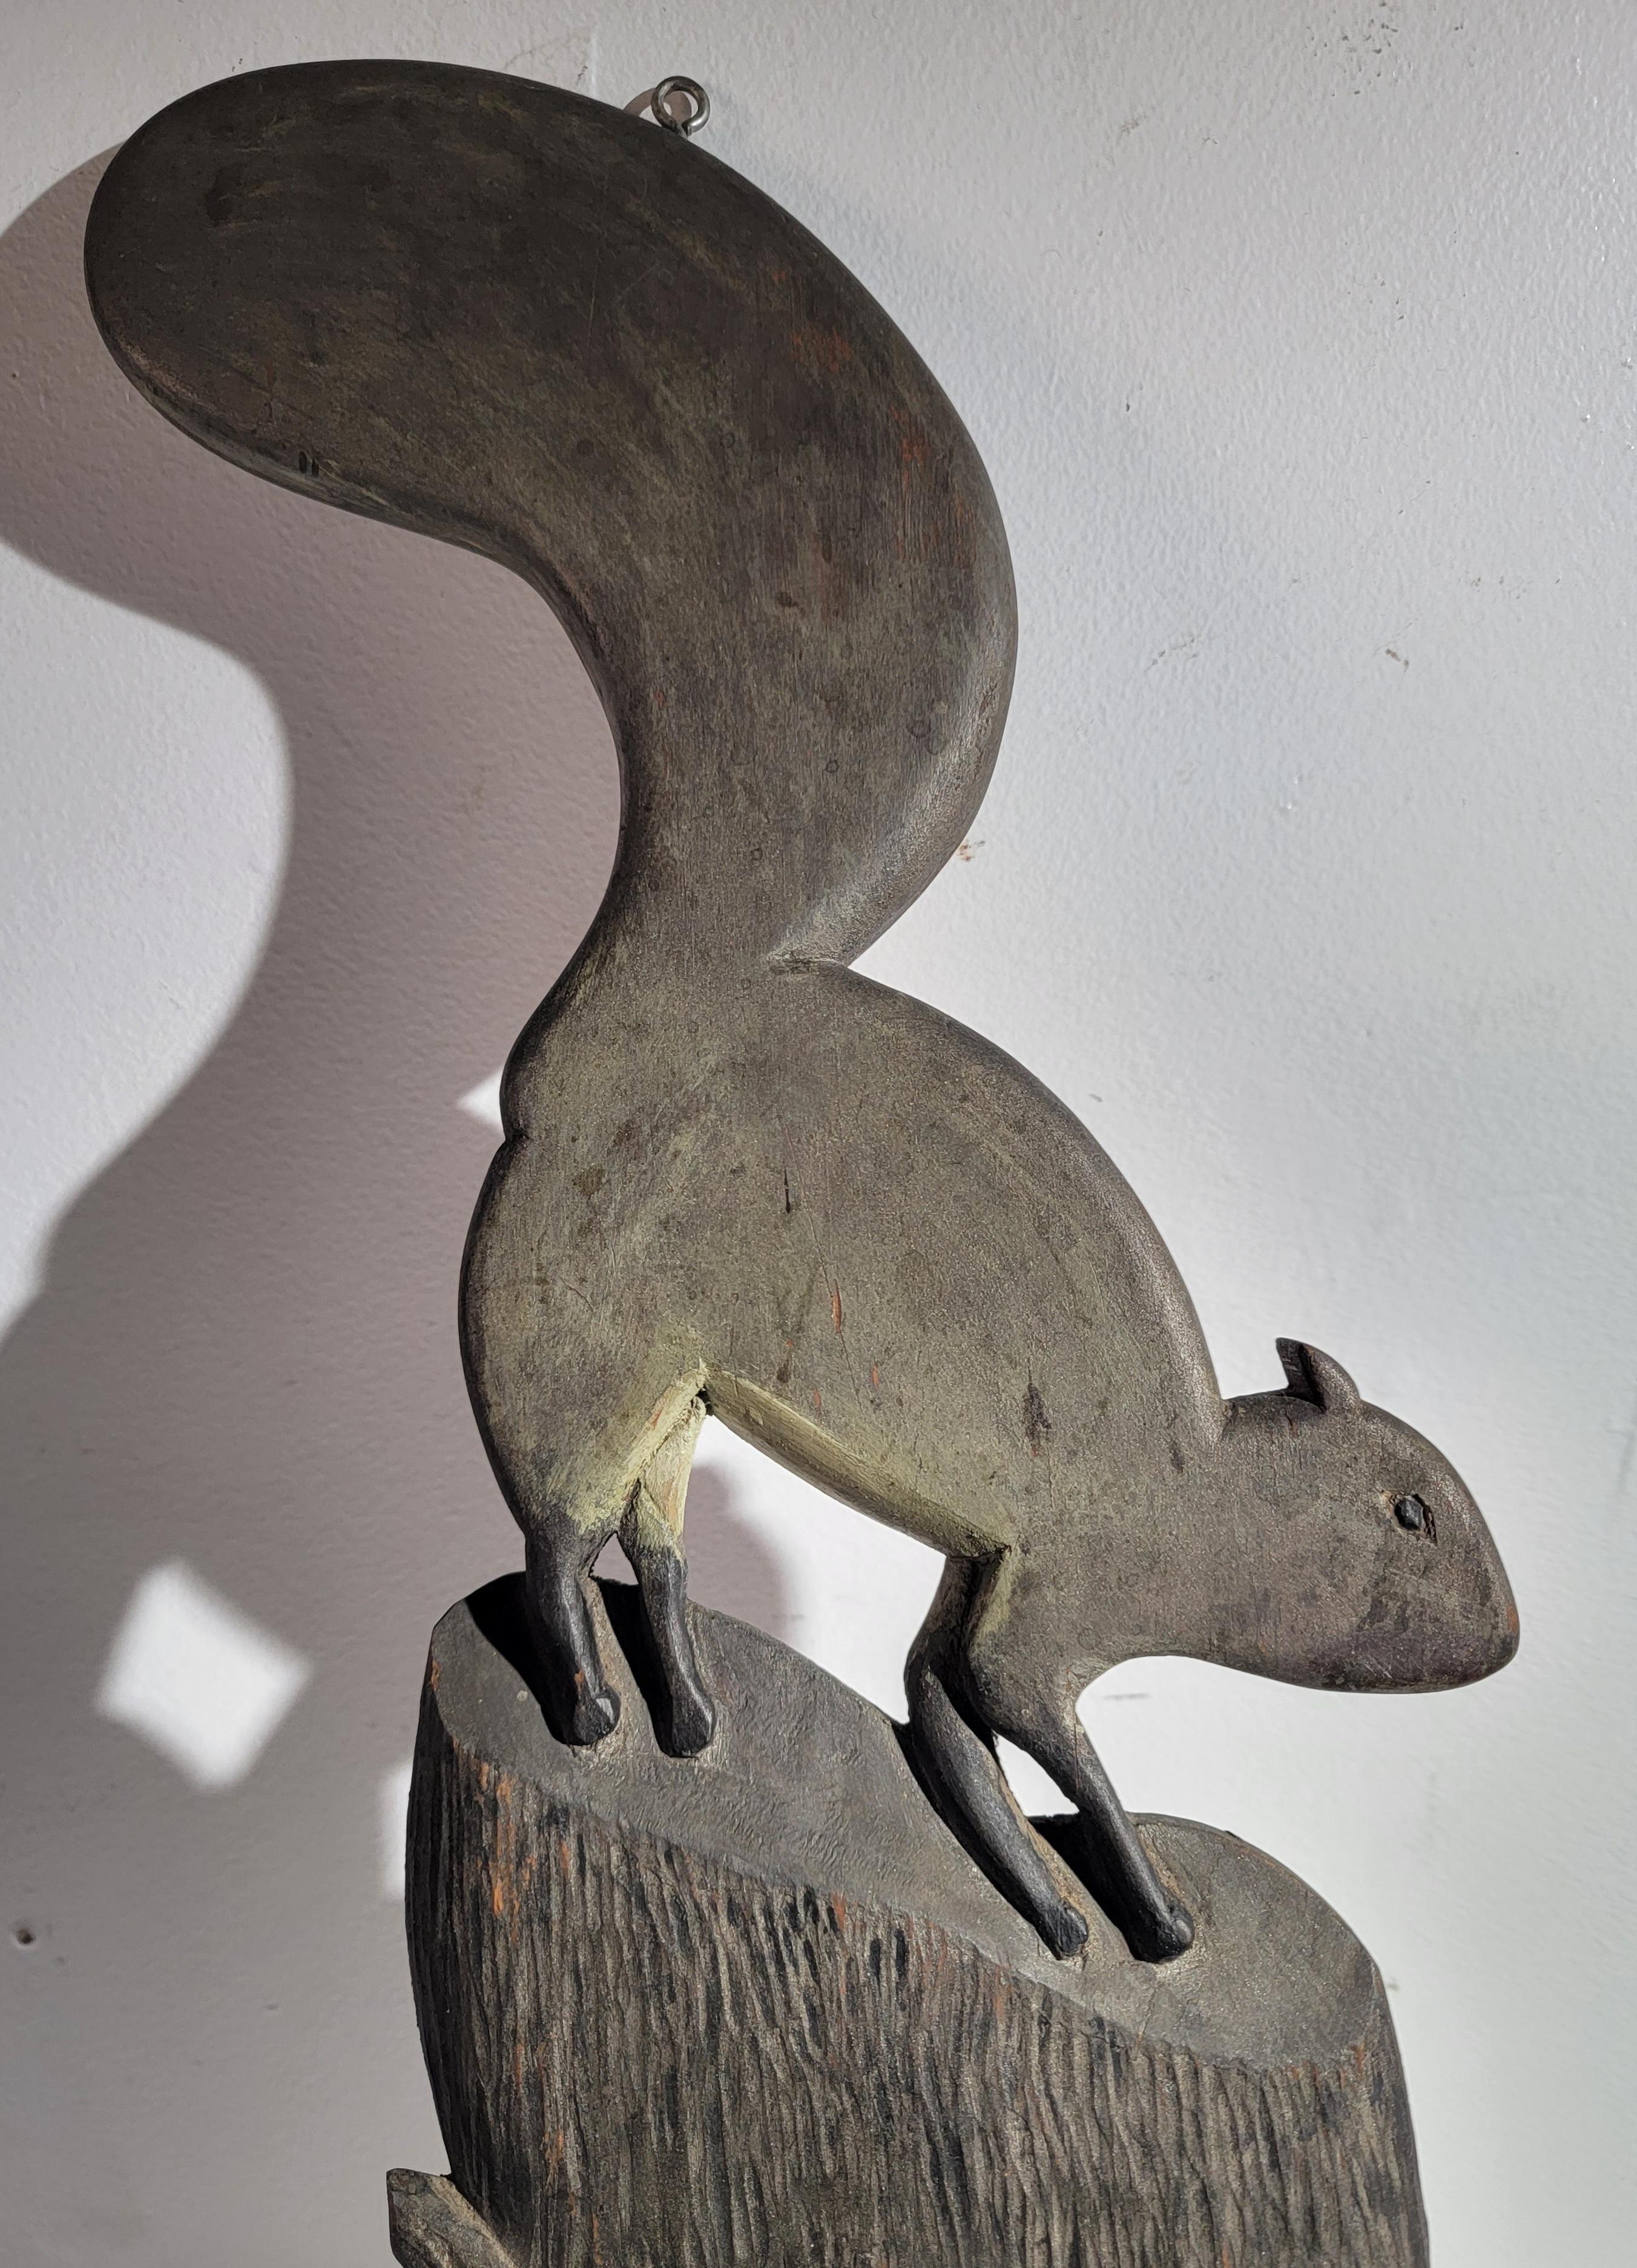 This amazing early hand carved wood squirrel is sitting on a stump or log. It has a wonderful undisturbed painted surface.Its all original painted surface with an amazing crusty surface. Its a grey painted surface.